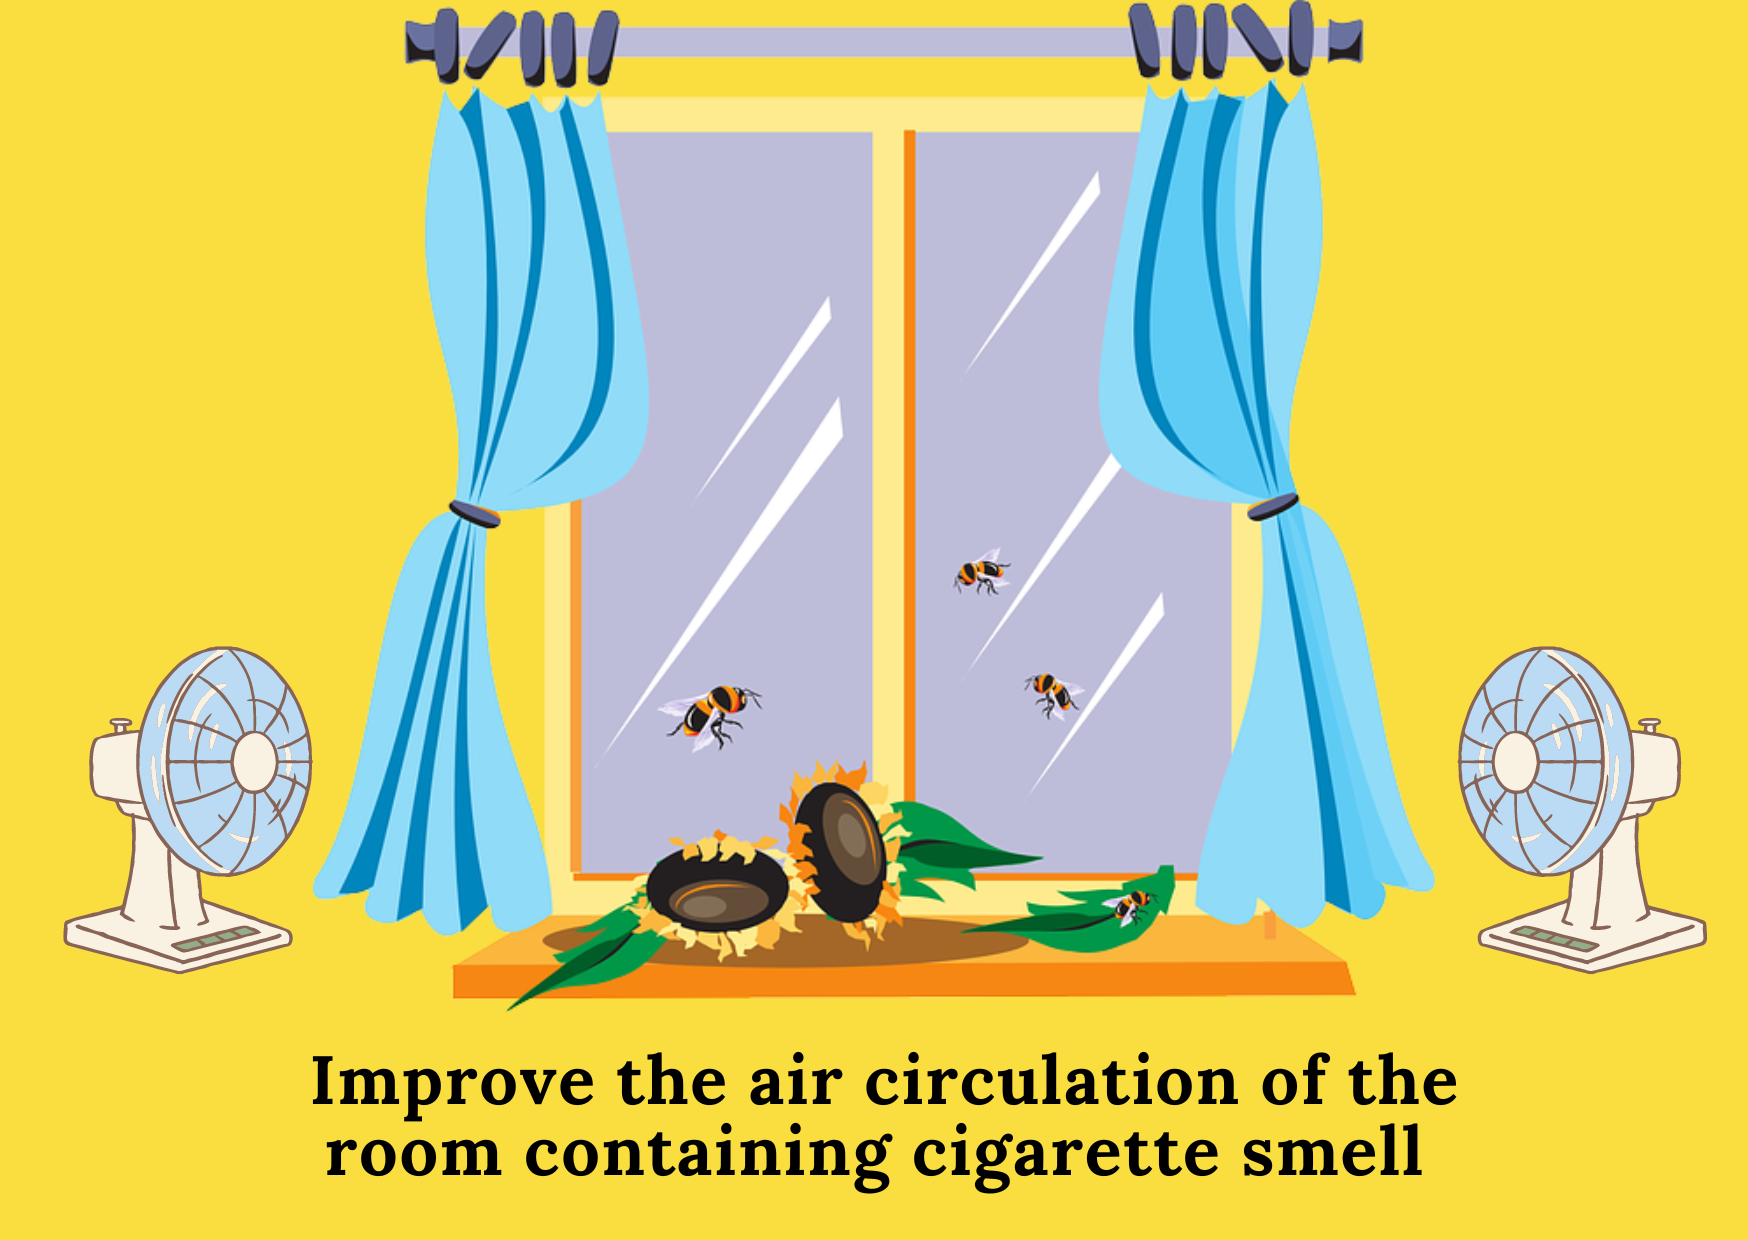 1. Improve the air circulation of the room containing cigarette smell